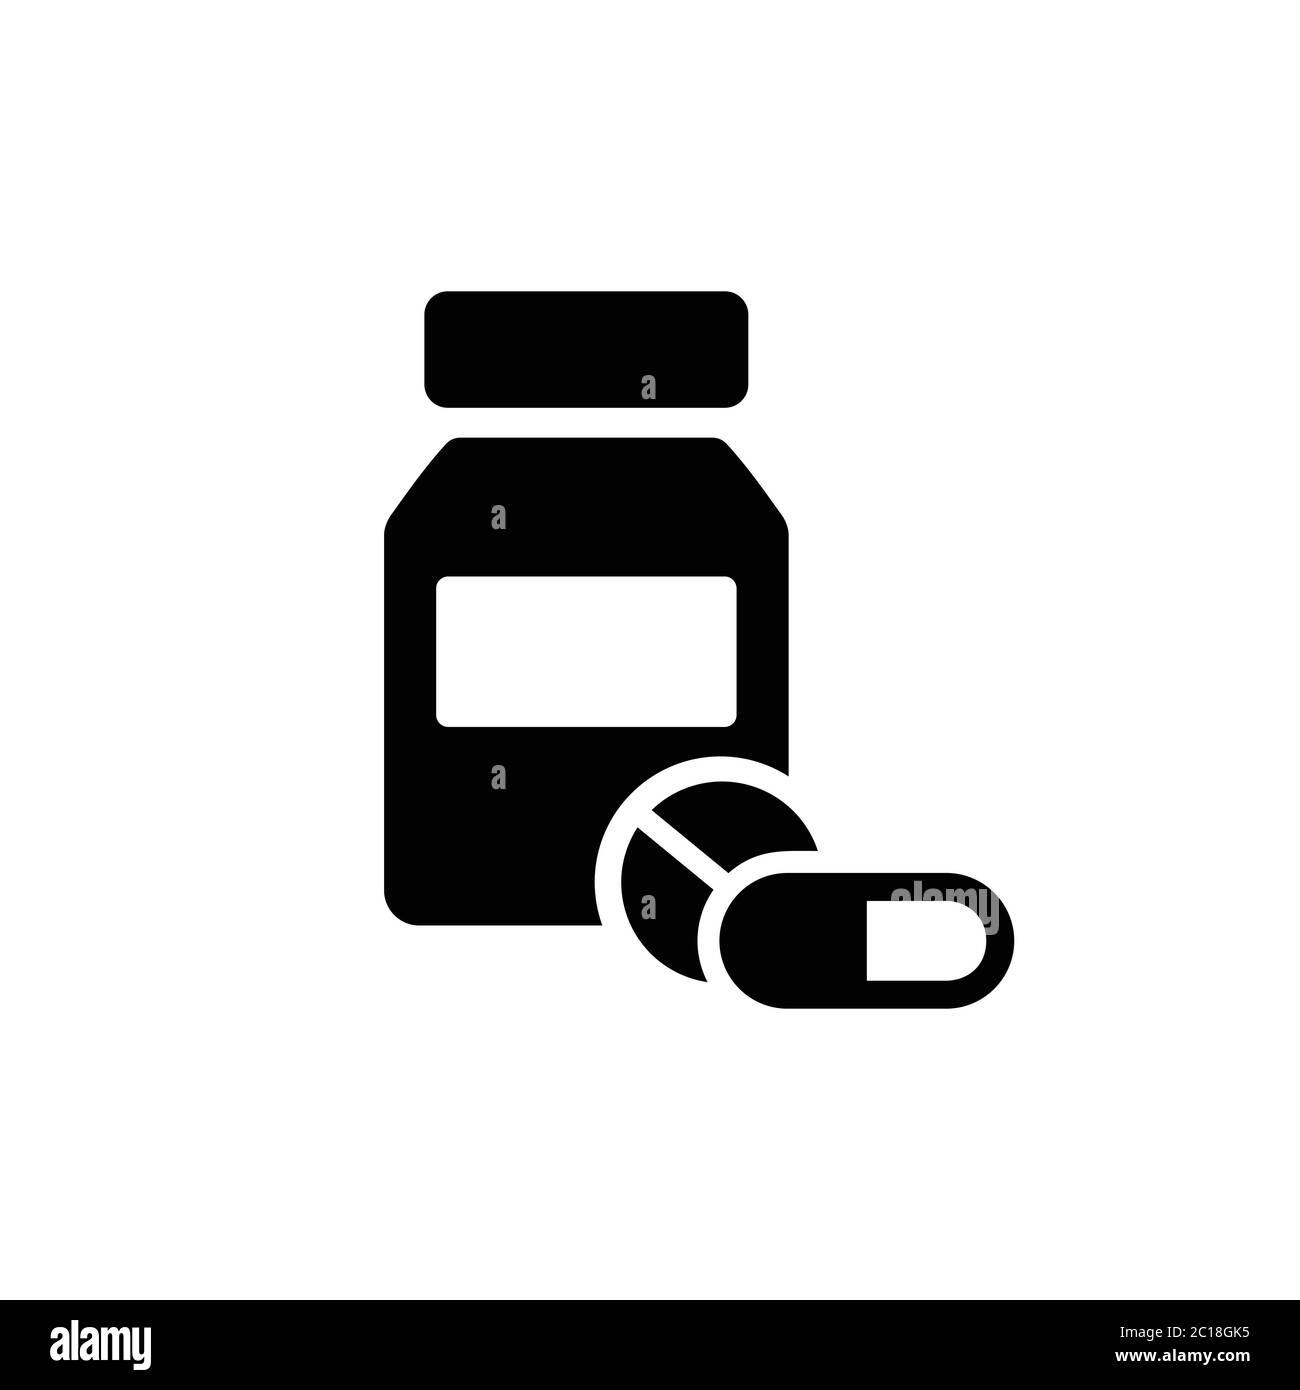 Silhouette icon of a bottle of medicine, pill and capsule. Simple flat minimalist medicine container in black and white design. Stock Vector